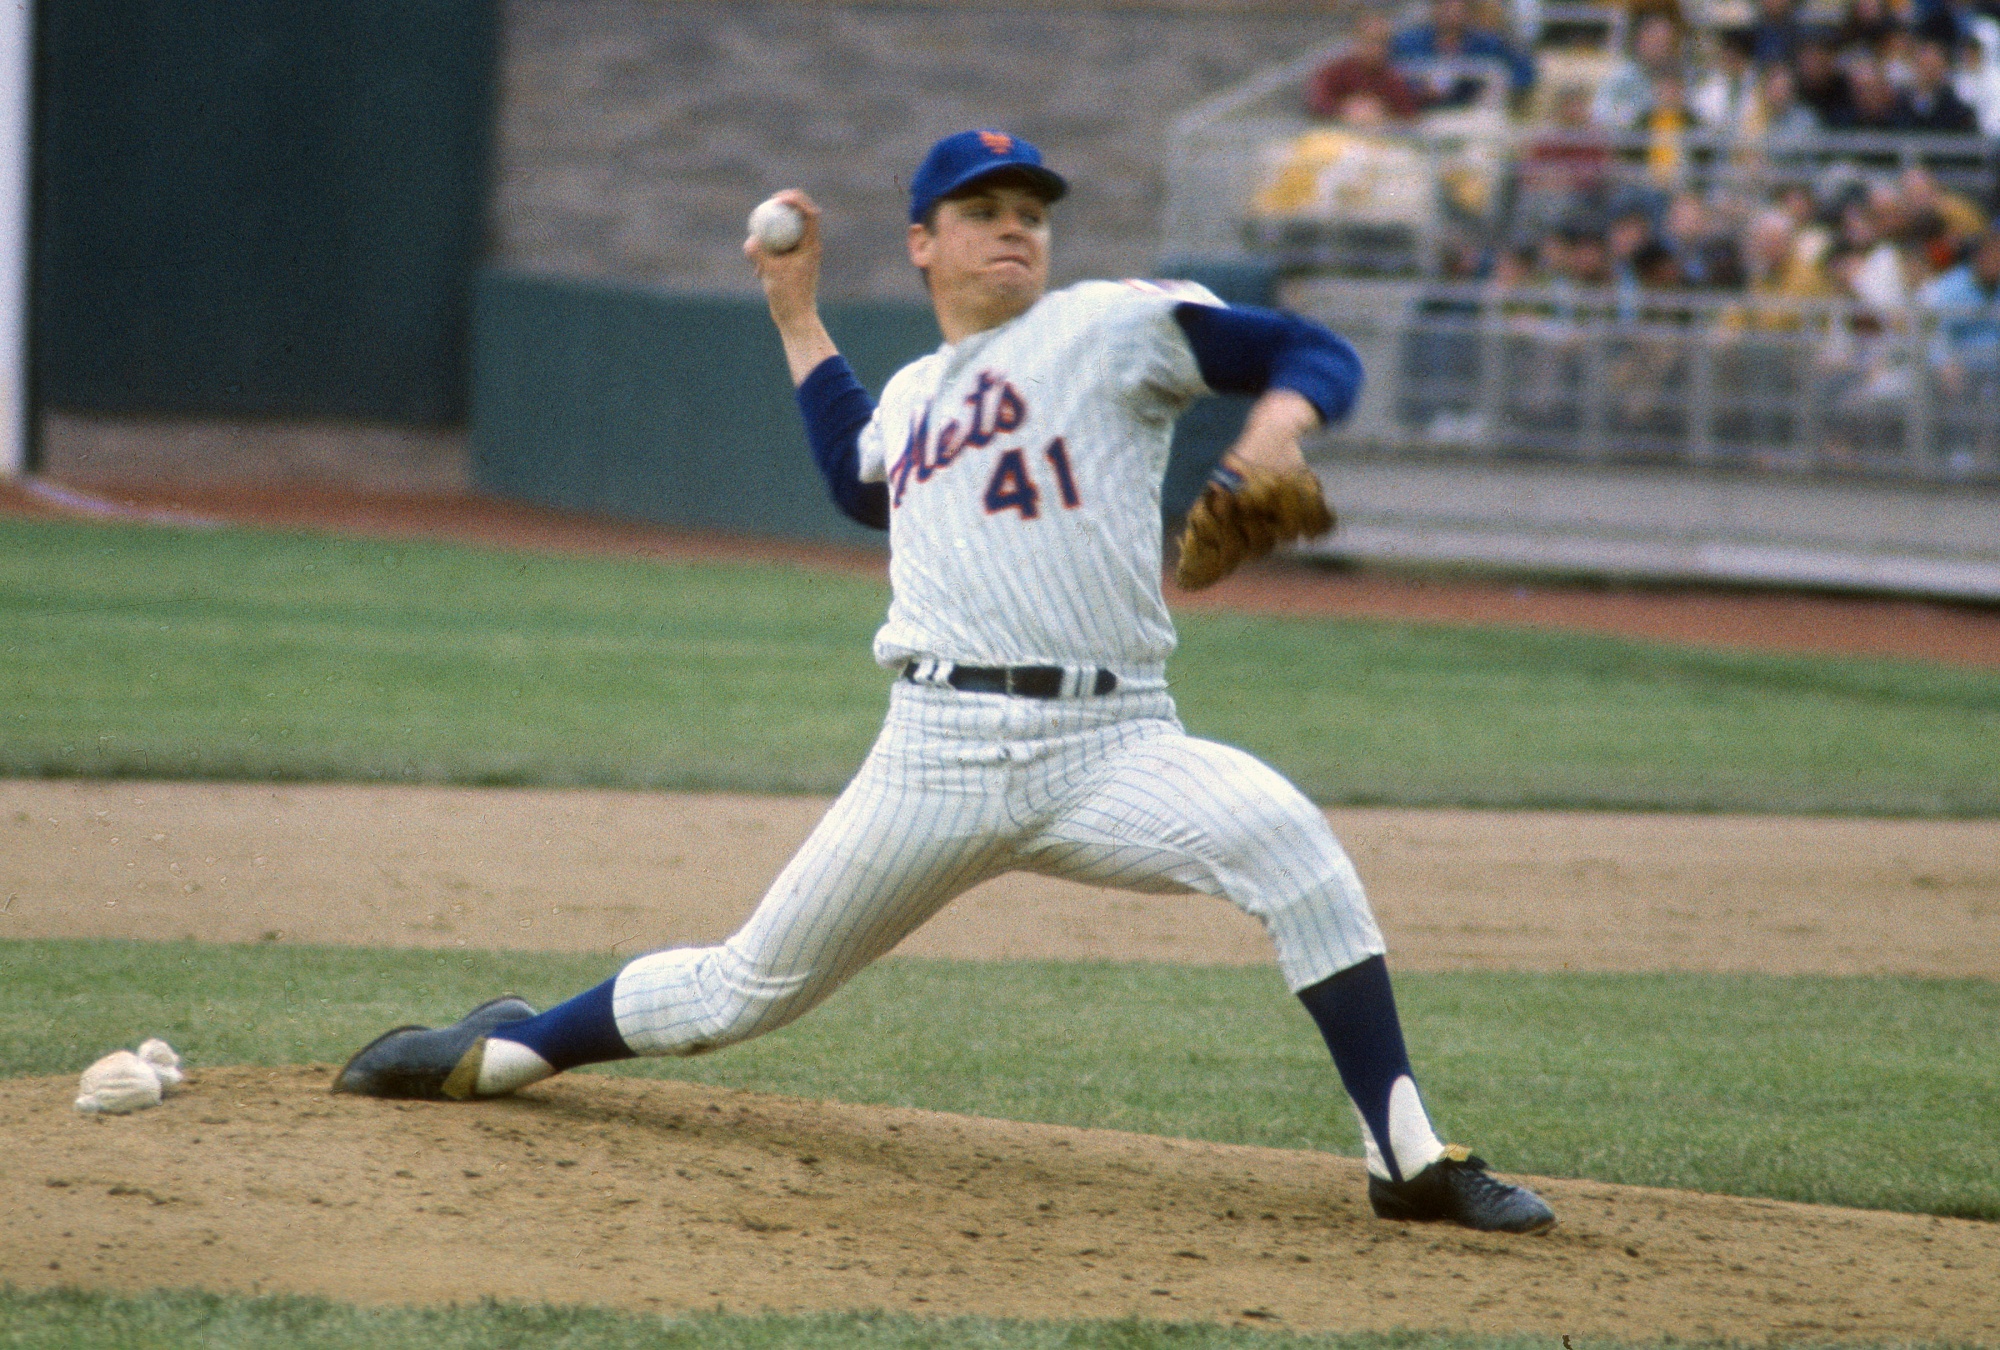 Tom Seaver remembered as one of baseball's greatest pitchers